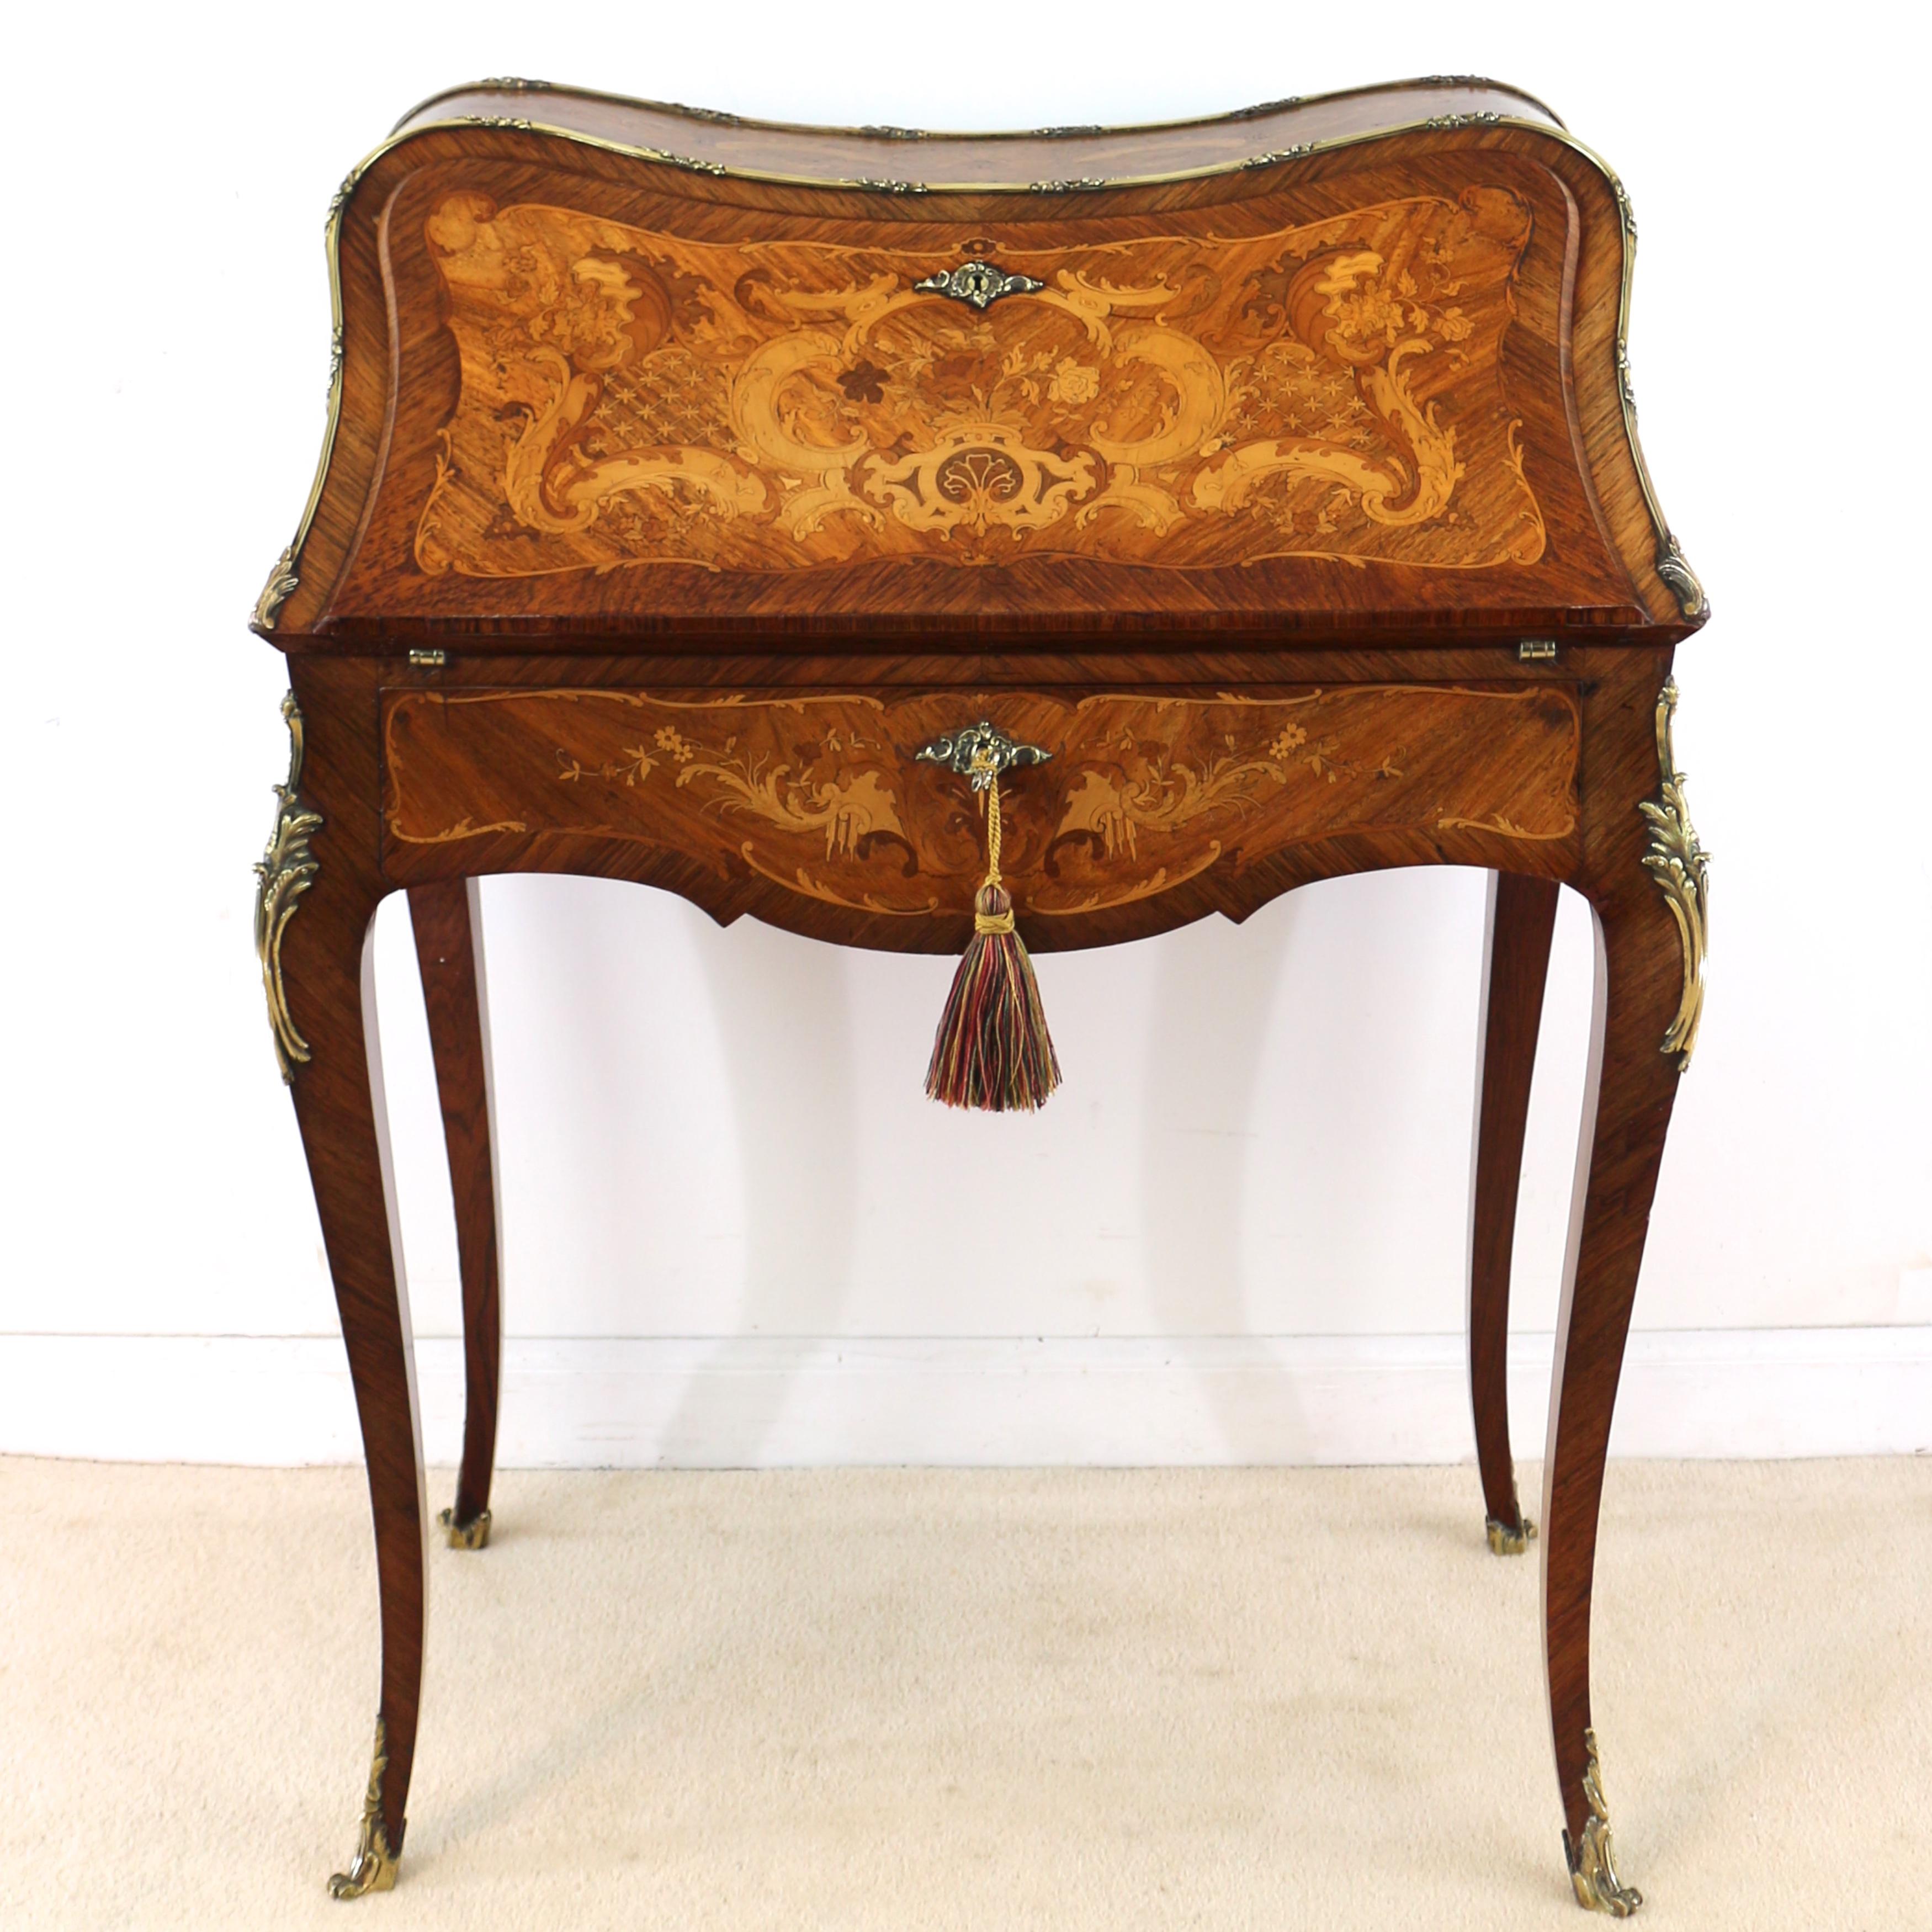 A very attractive late 19th century French Louis XV Rococo style kingwood and marquetry bureau de dame retailed circa 1900 by the renowned firm S & H Jewell of London. Of bombé form and profusely inlaid with scrolling acanthus leaf and floral